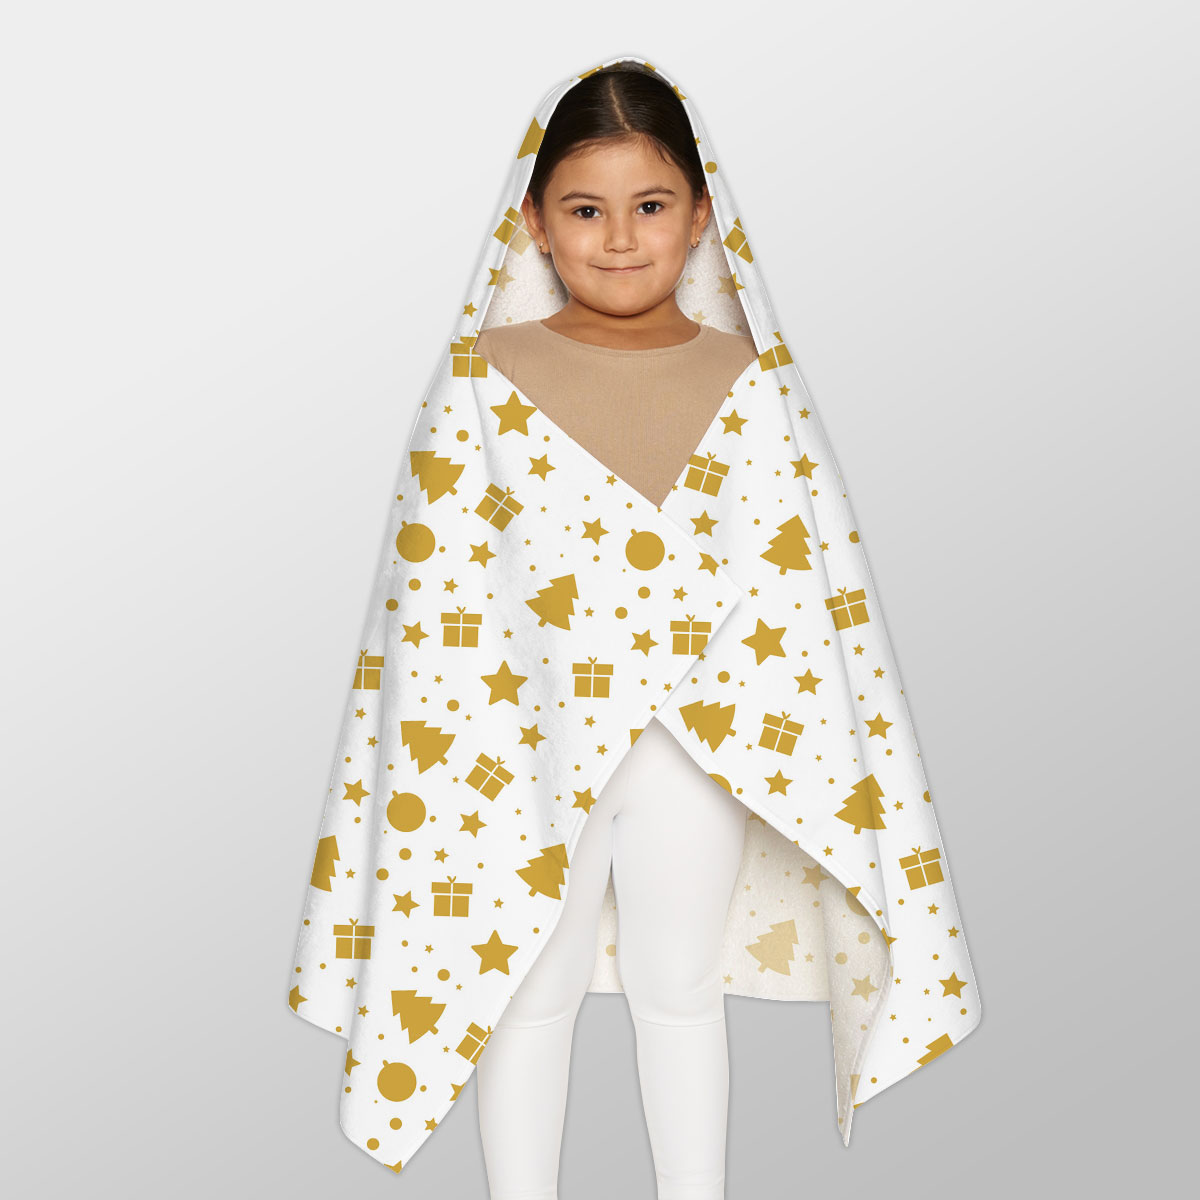 Christmas Gifts, Baudles And Pine Tree Silhouette Filled In Gold Color Pattern Youth Hooded Towel